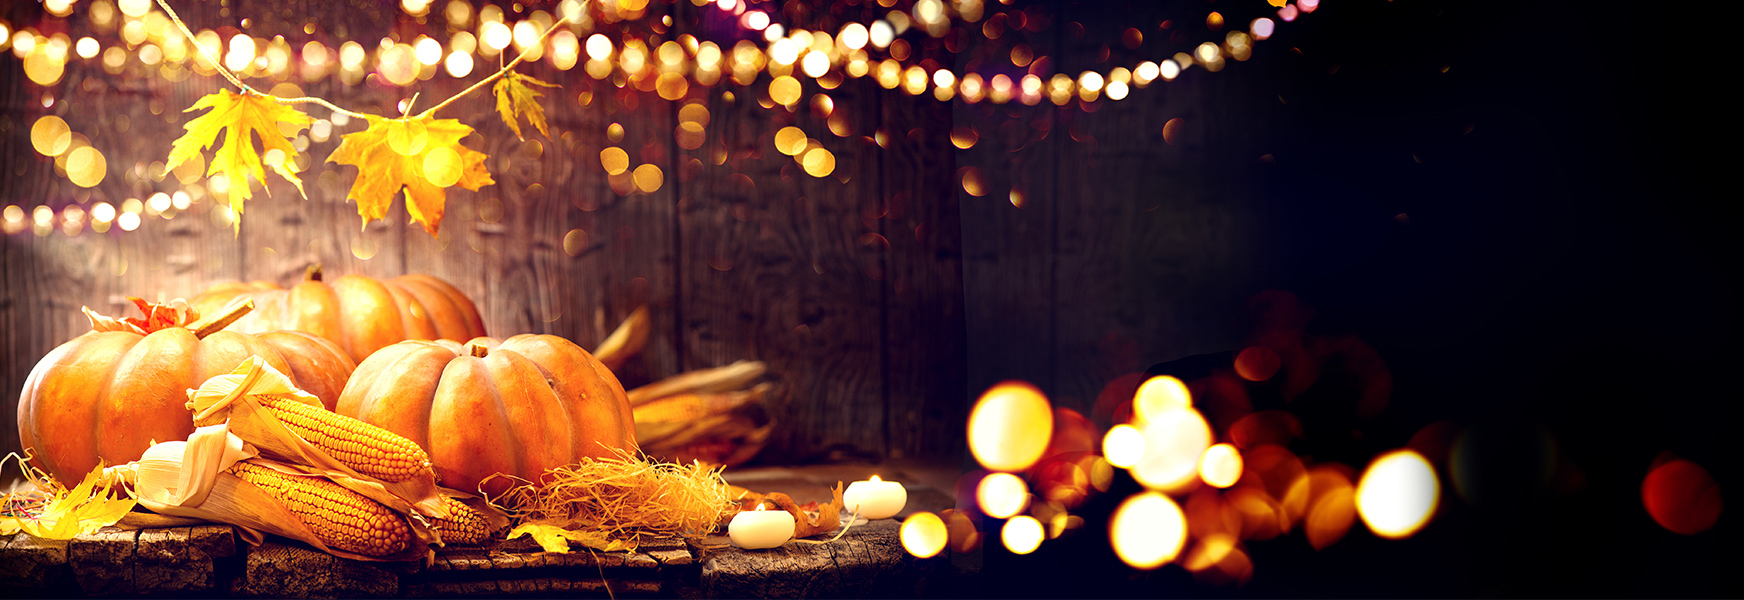 Pumpkins, corn, and leaves on display in front of a wooden background with decorative lights